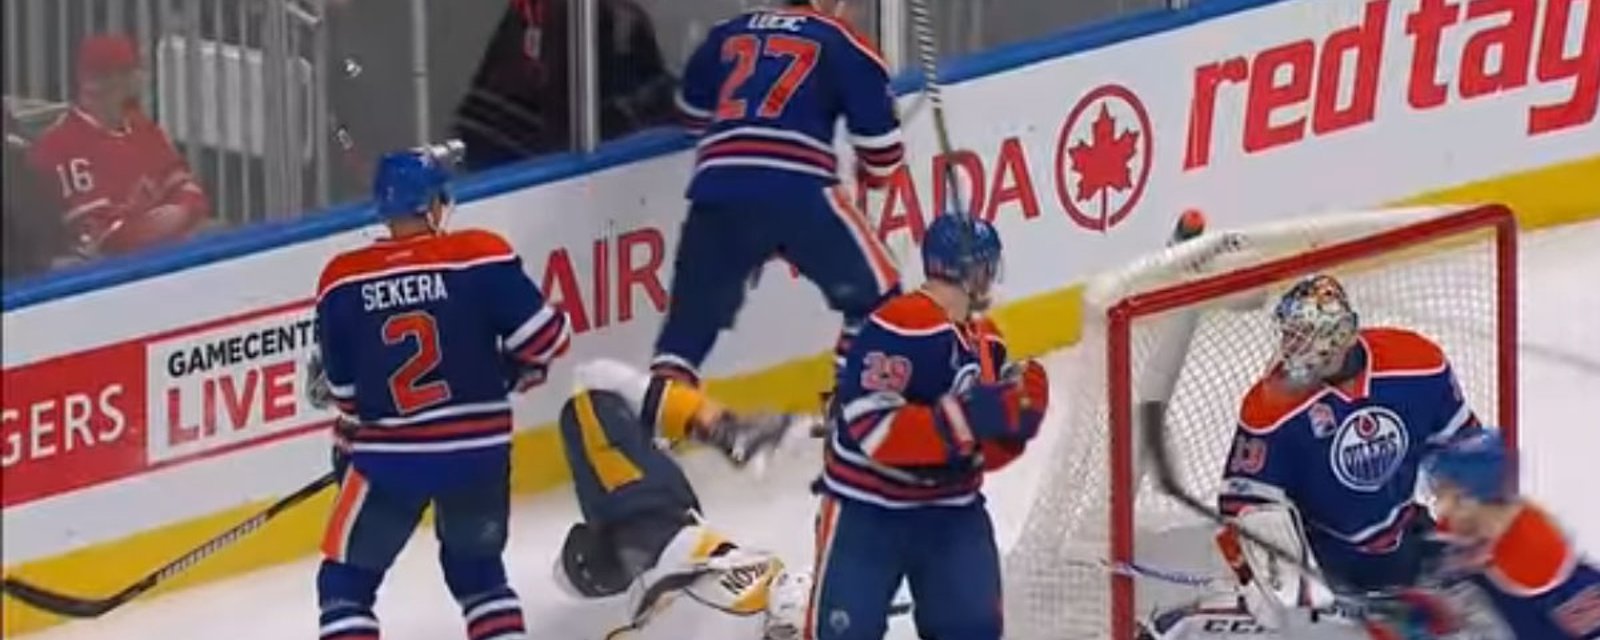 Must See: Lucic destroys Watson then scores game tying goal.